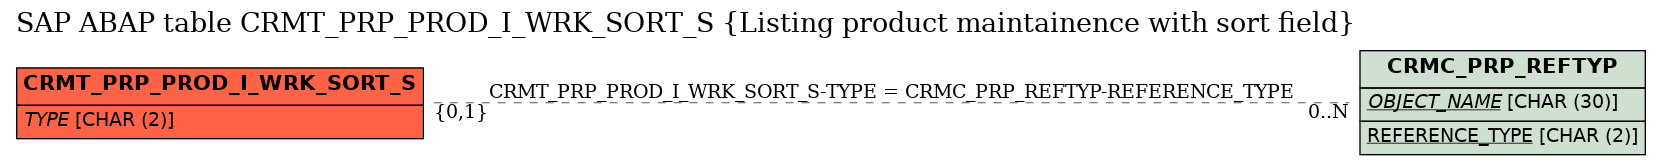 E-R Diagram for table CRMT_PRP_PROD_I_WRK_SORT_S (Listing product maintainence with sort field)